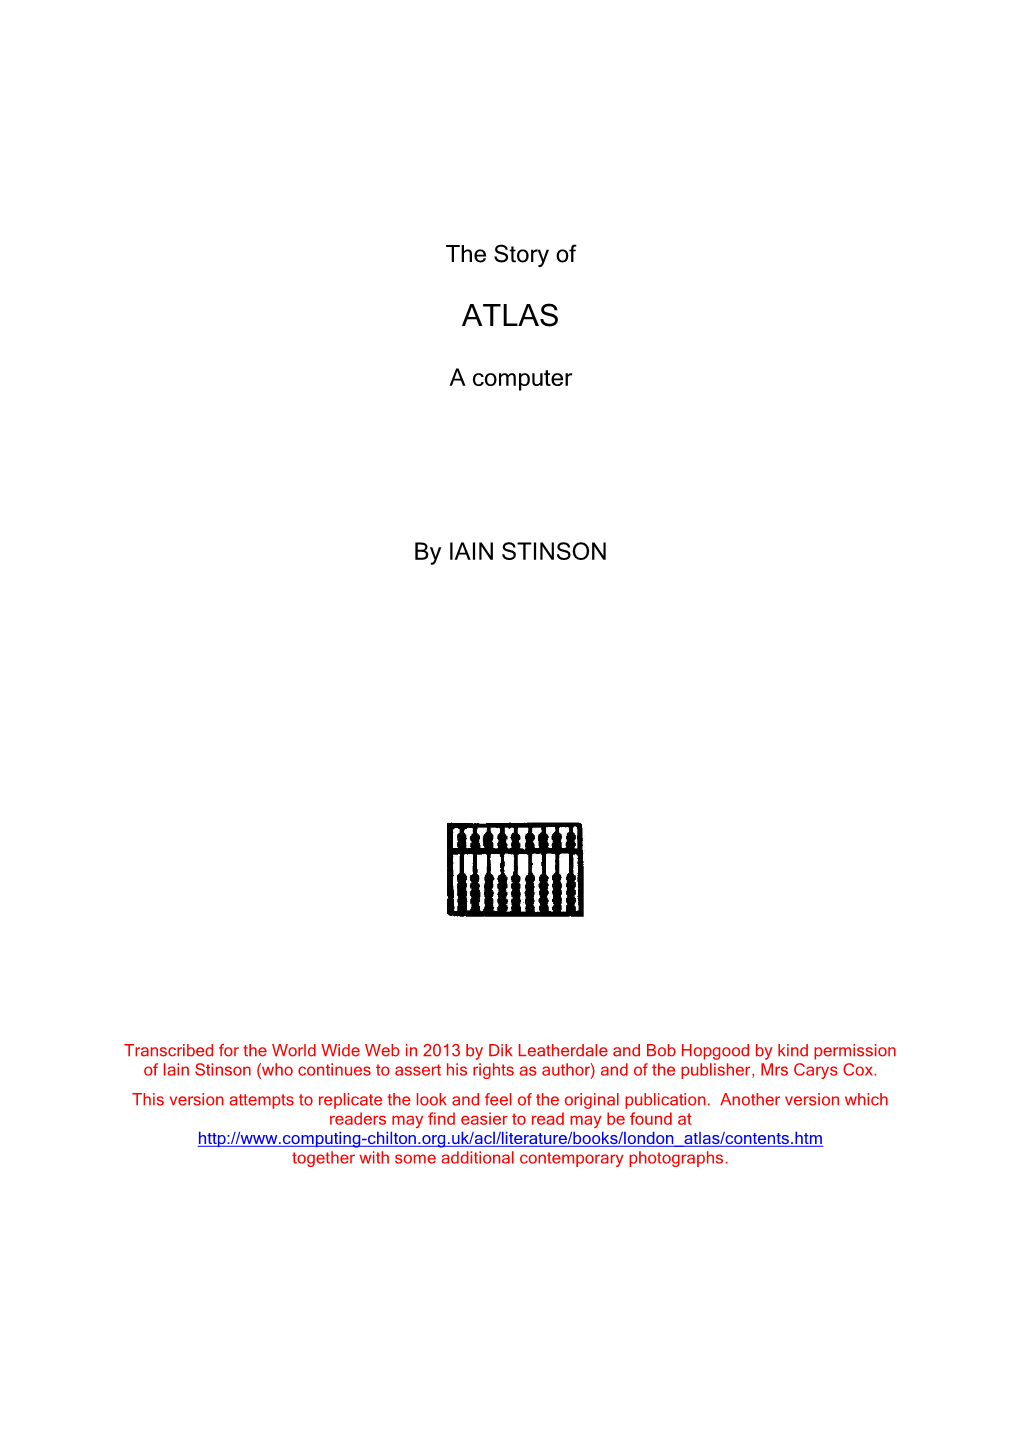 The Story of Atlas, a Computer